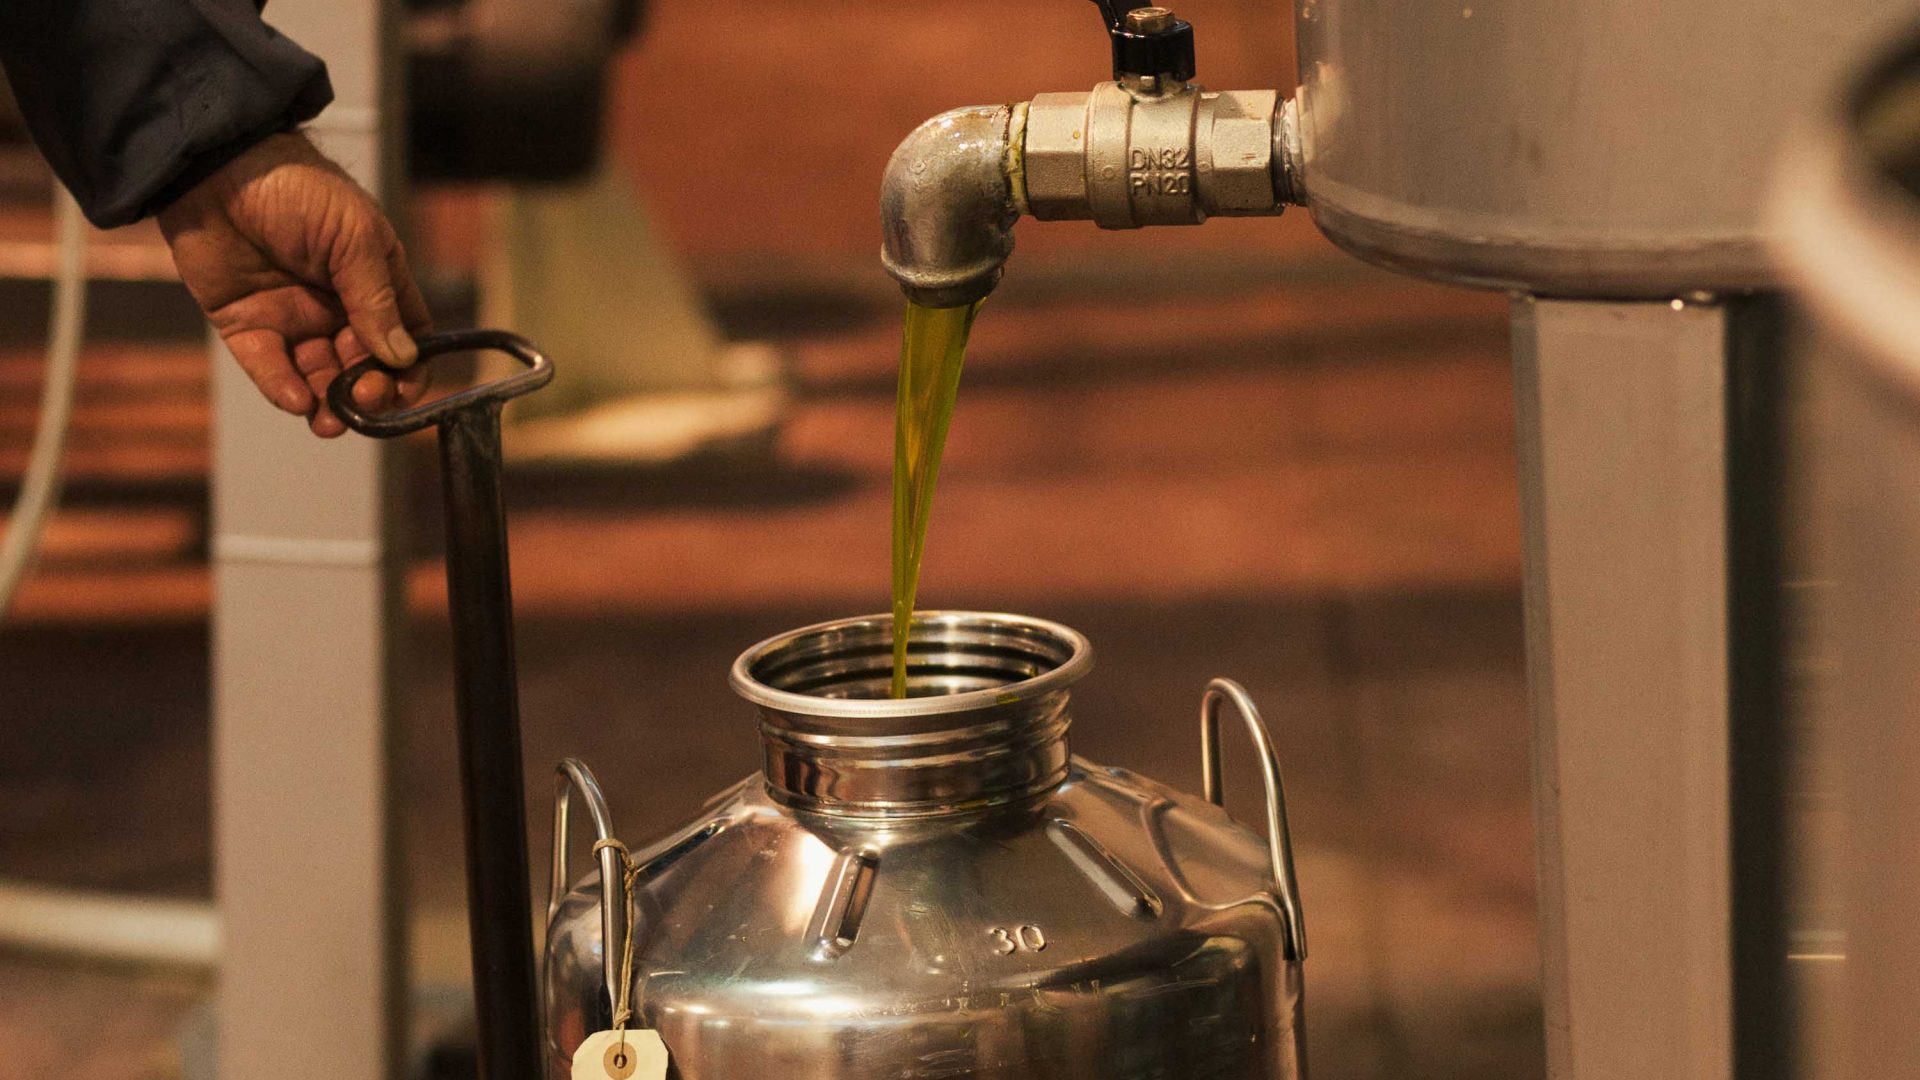 Olive can be seen pouring from a vat into a jar.